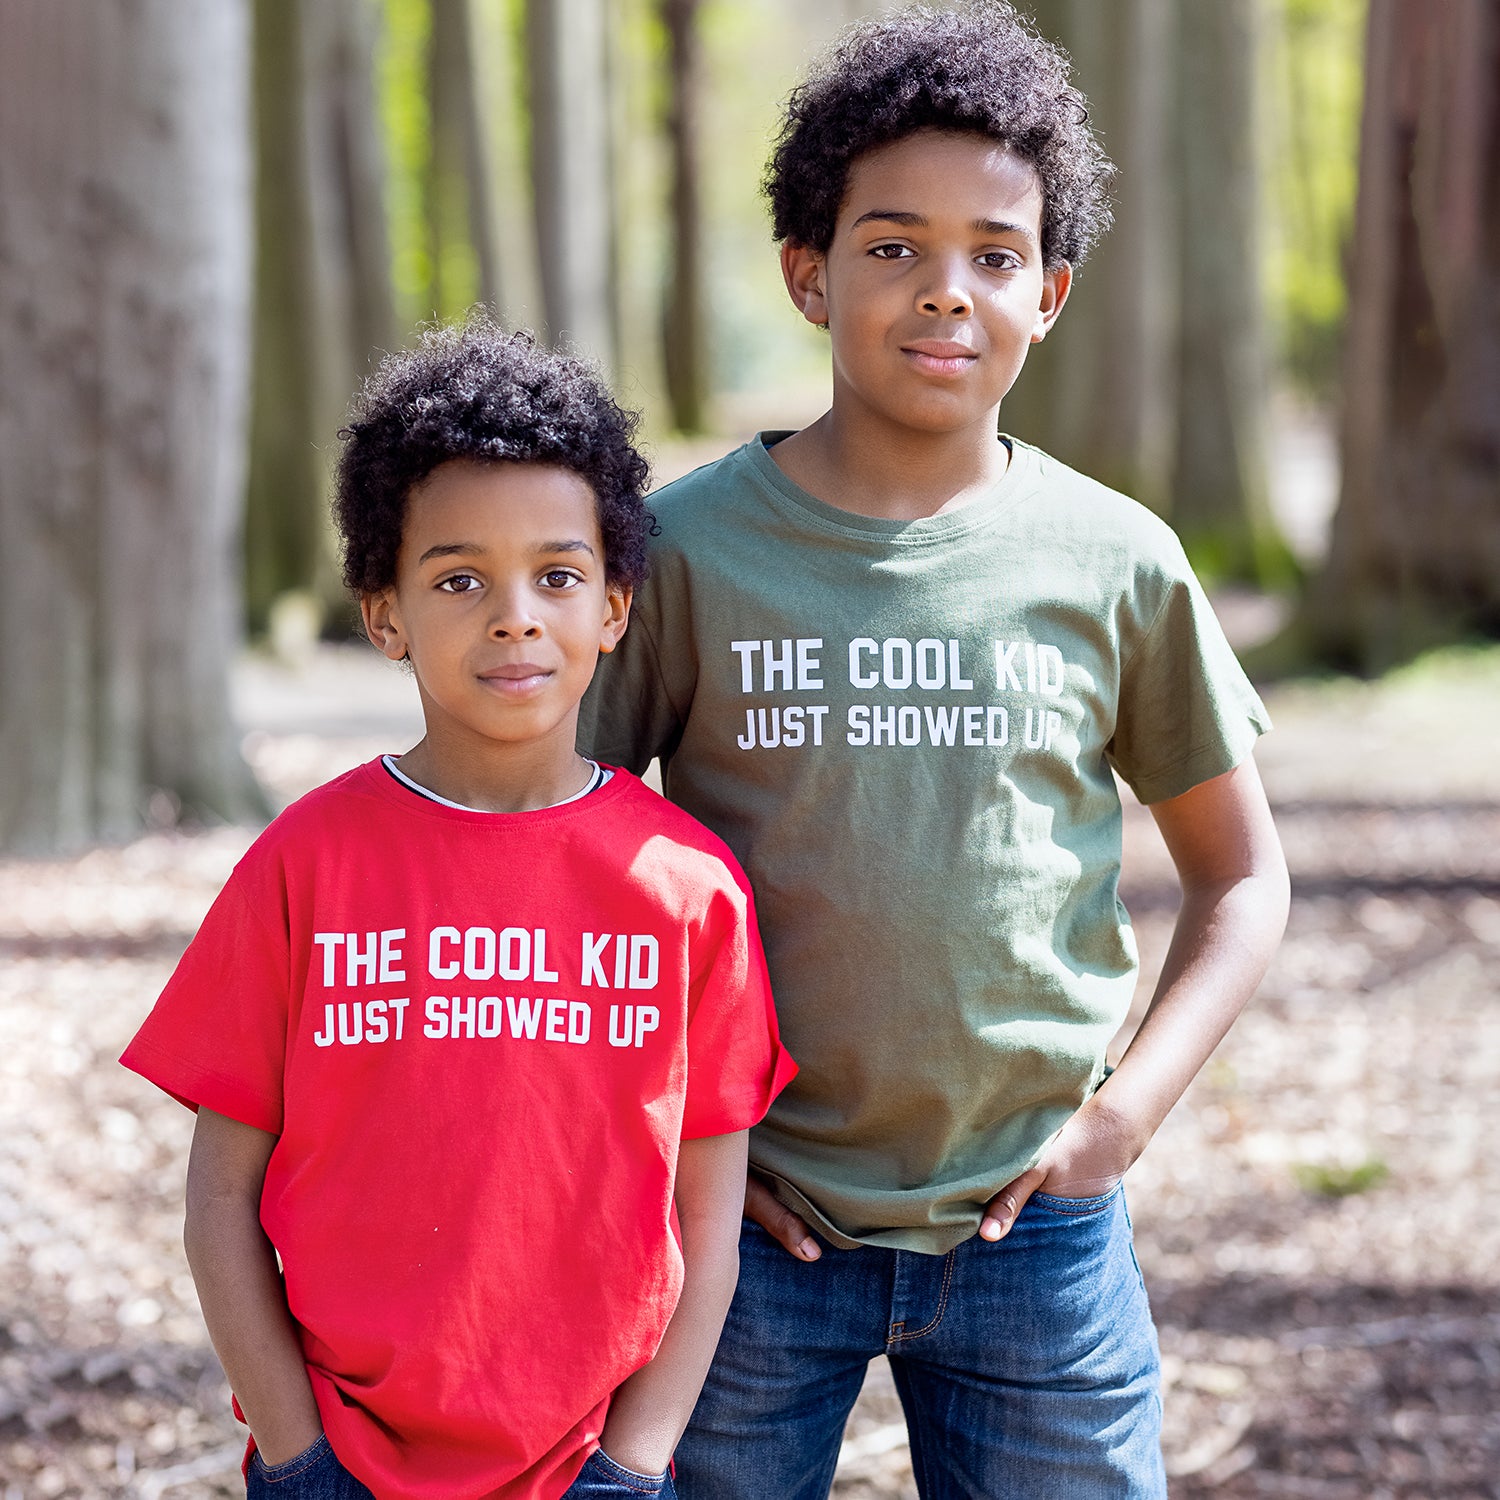 'The cool kid just showed up' kids shortsleeve shirt